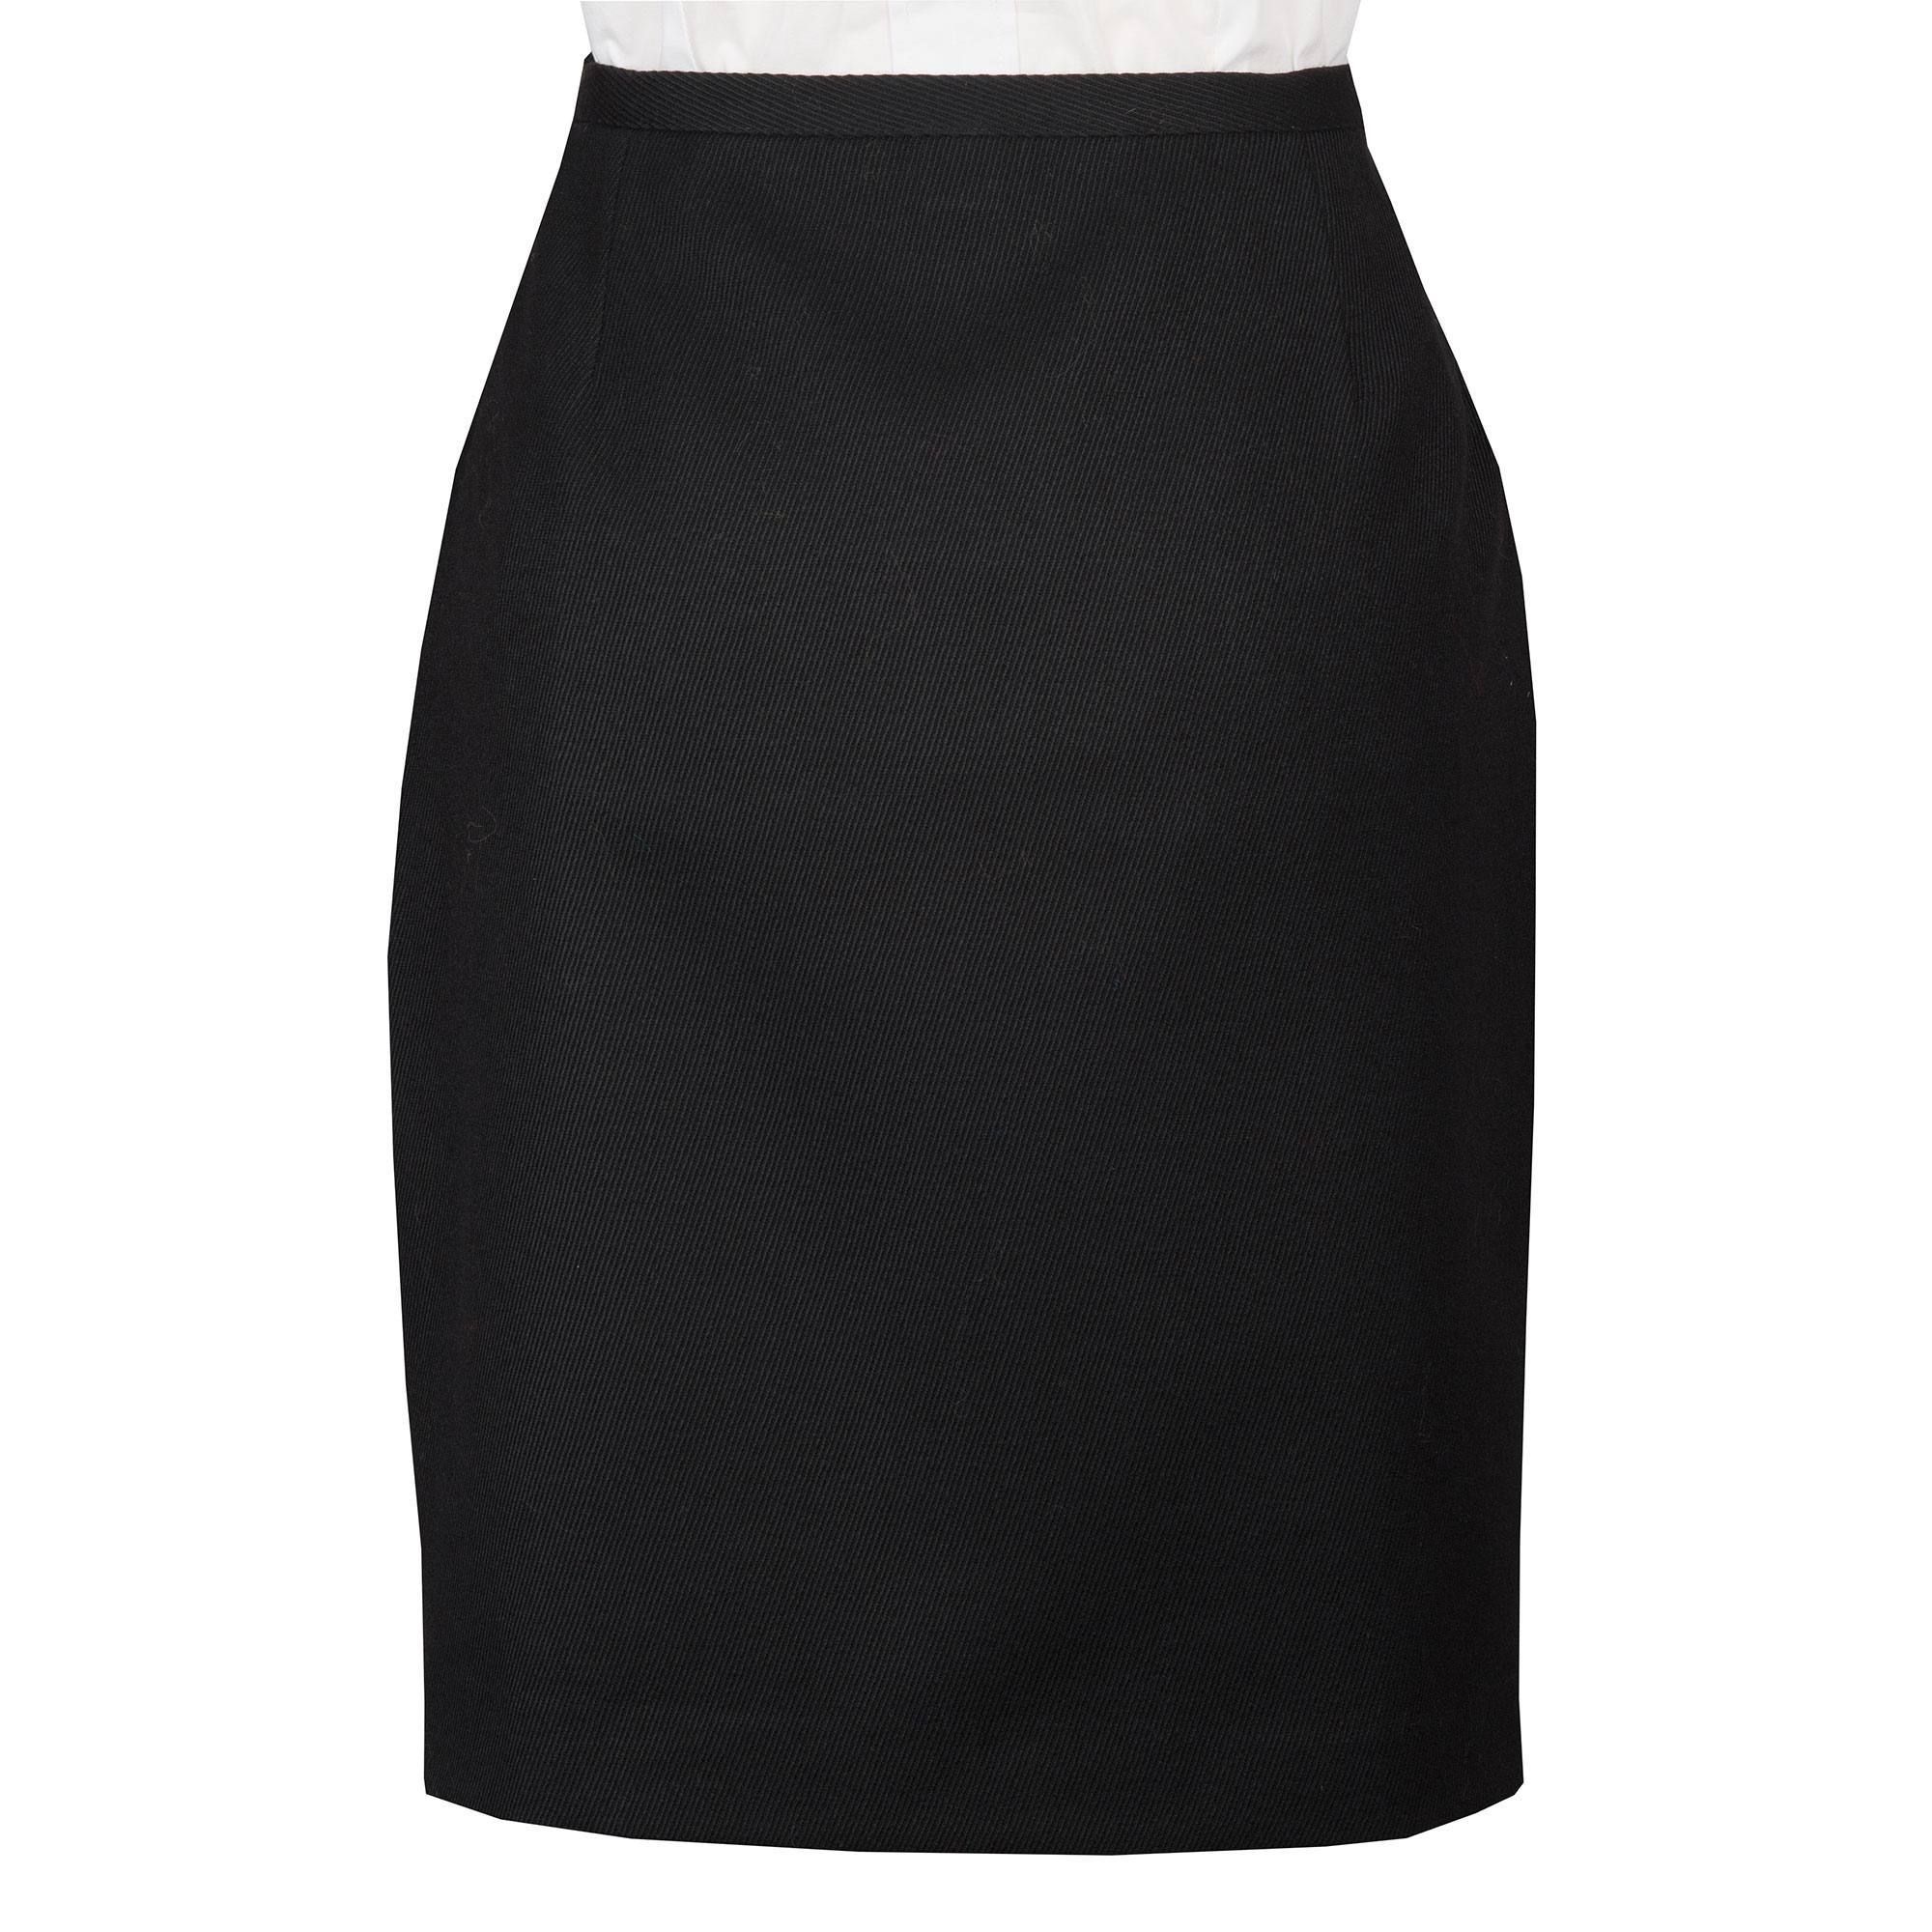 Tba Black Cavalry Twill Pencil Skirt | Ladies Country Clothing | Cordings